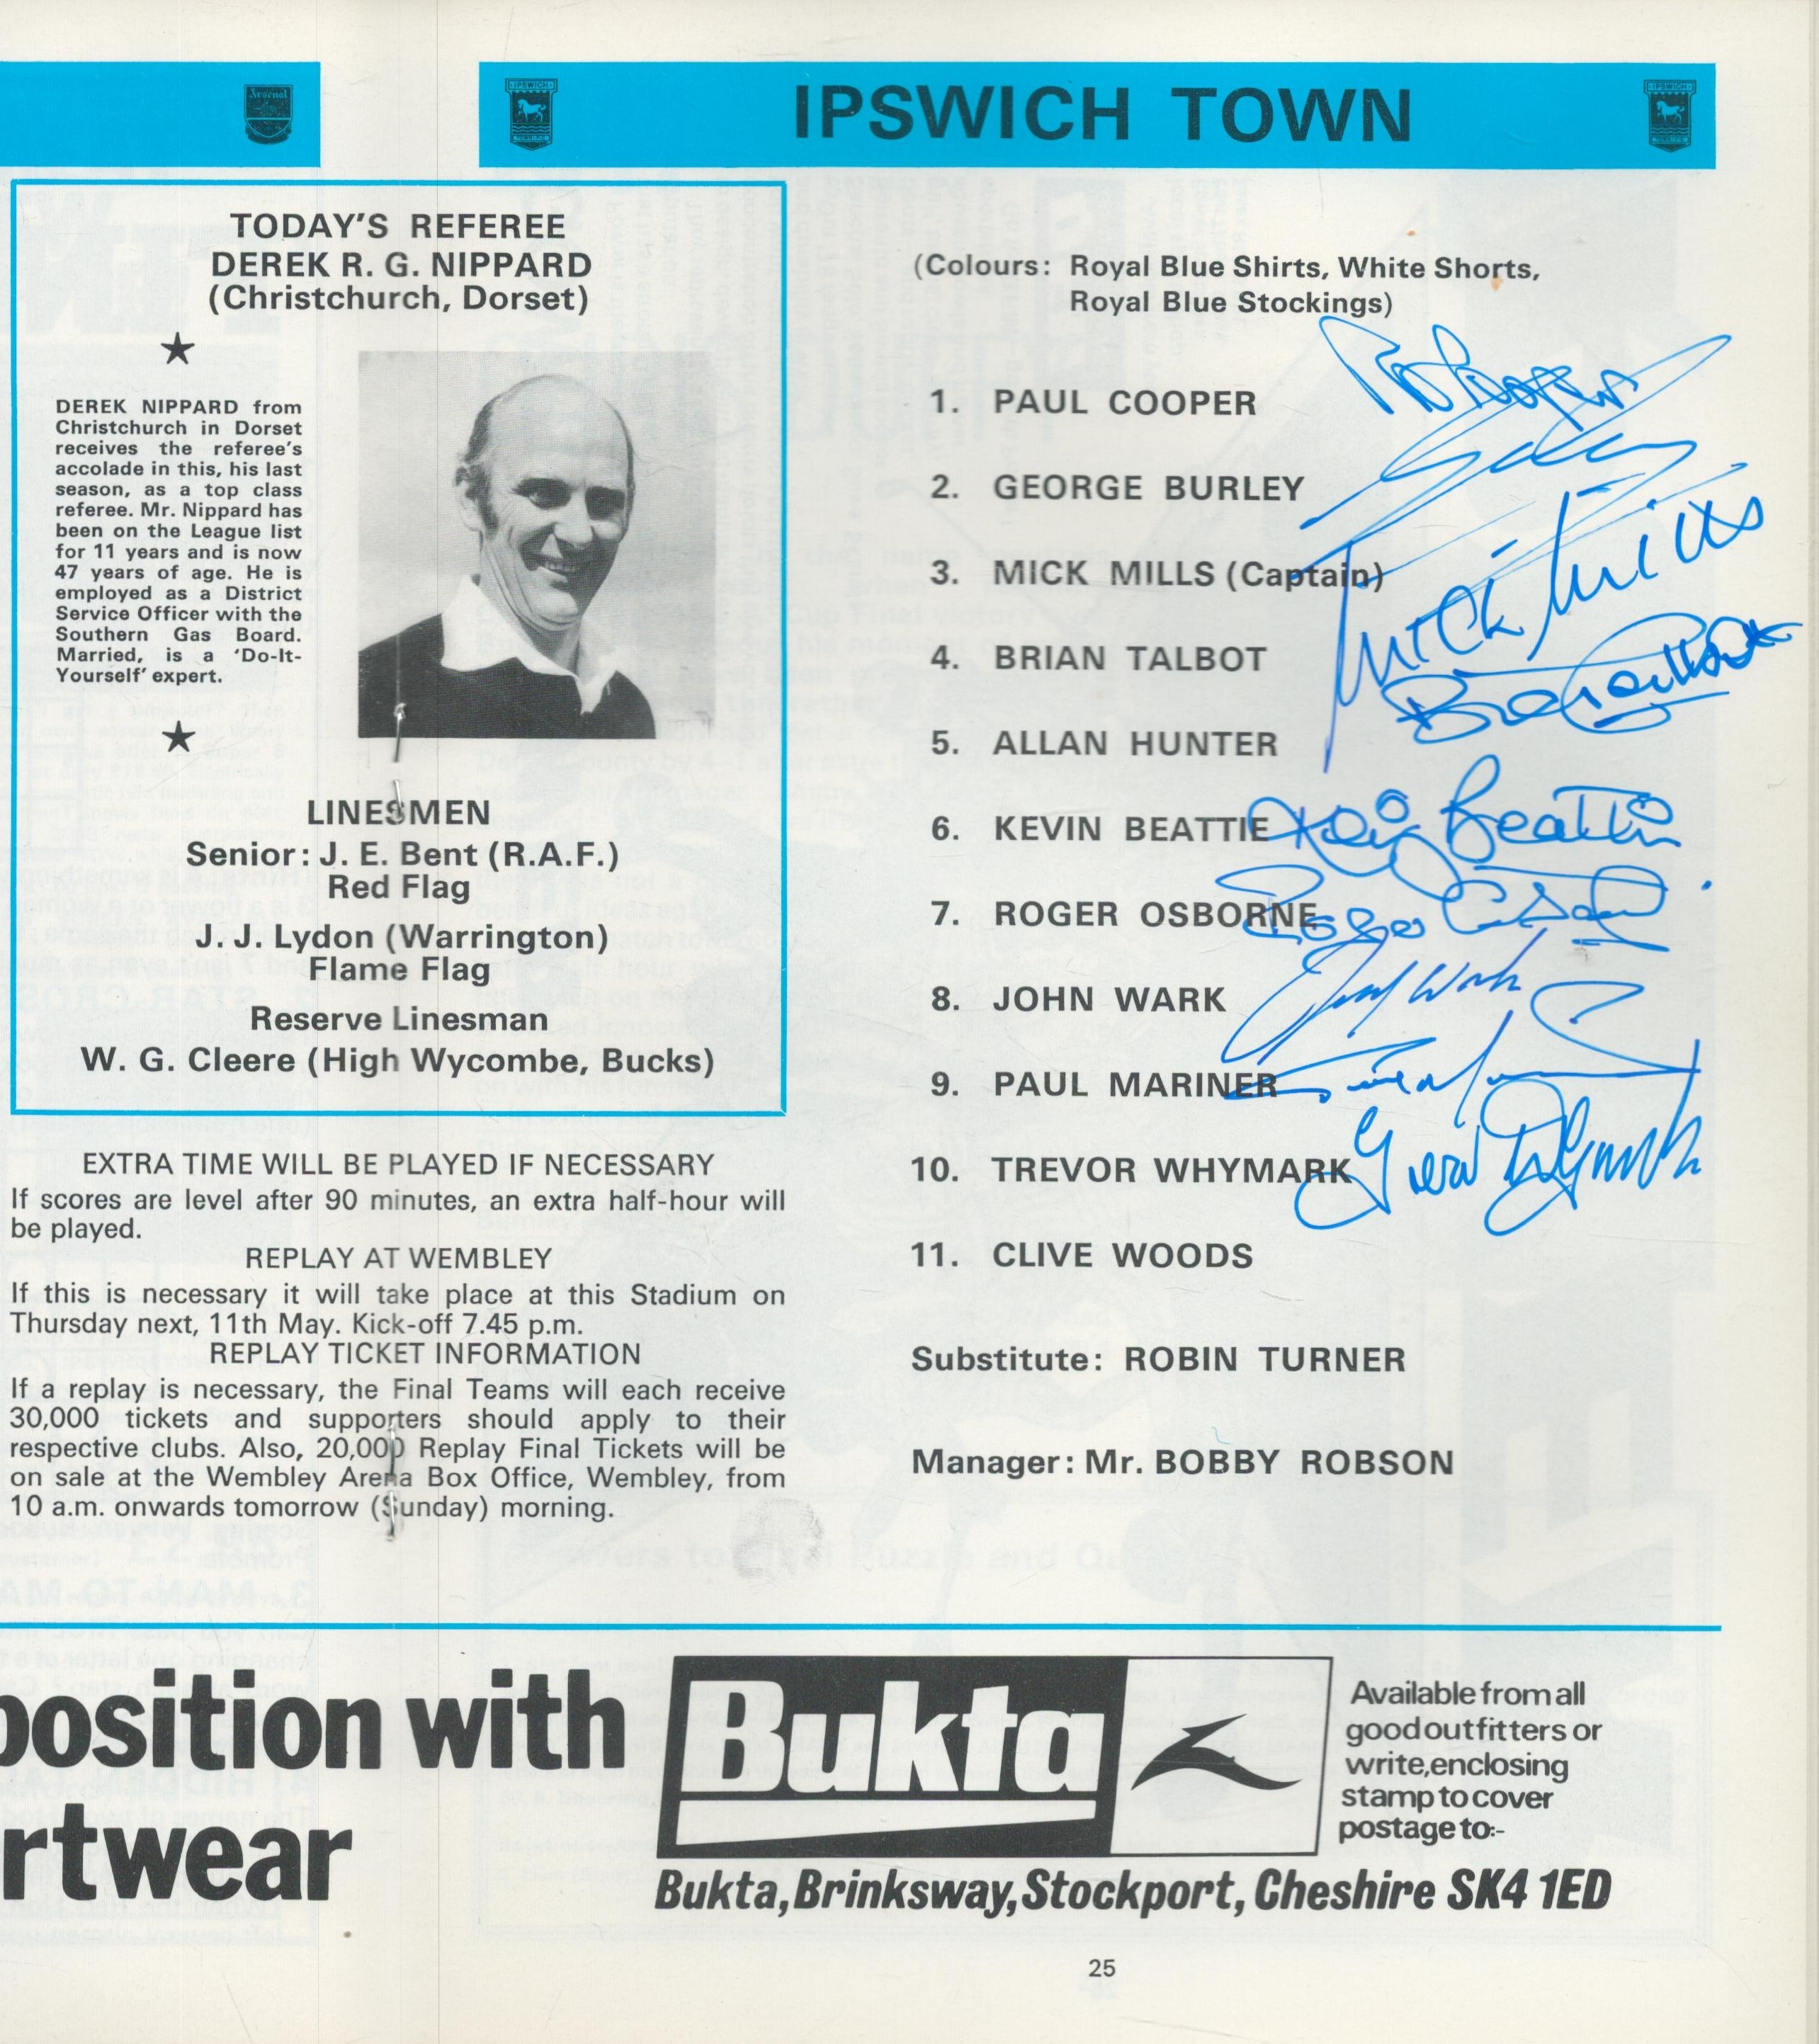 Multi signed Paul Cooper, Mick Mills, Kevin Beattie page 25 IPSWICH TOWN Programme. 'Arsenal v